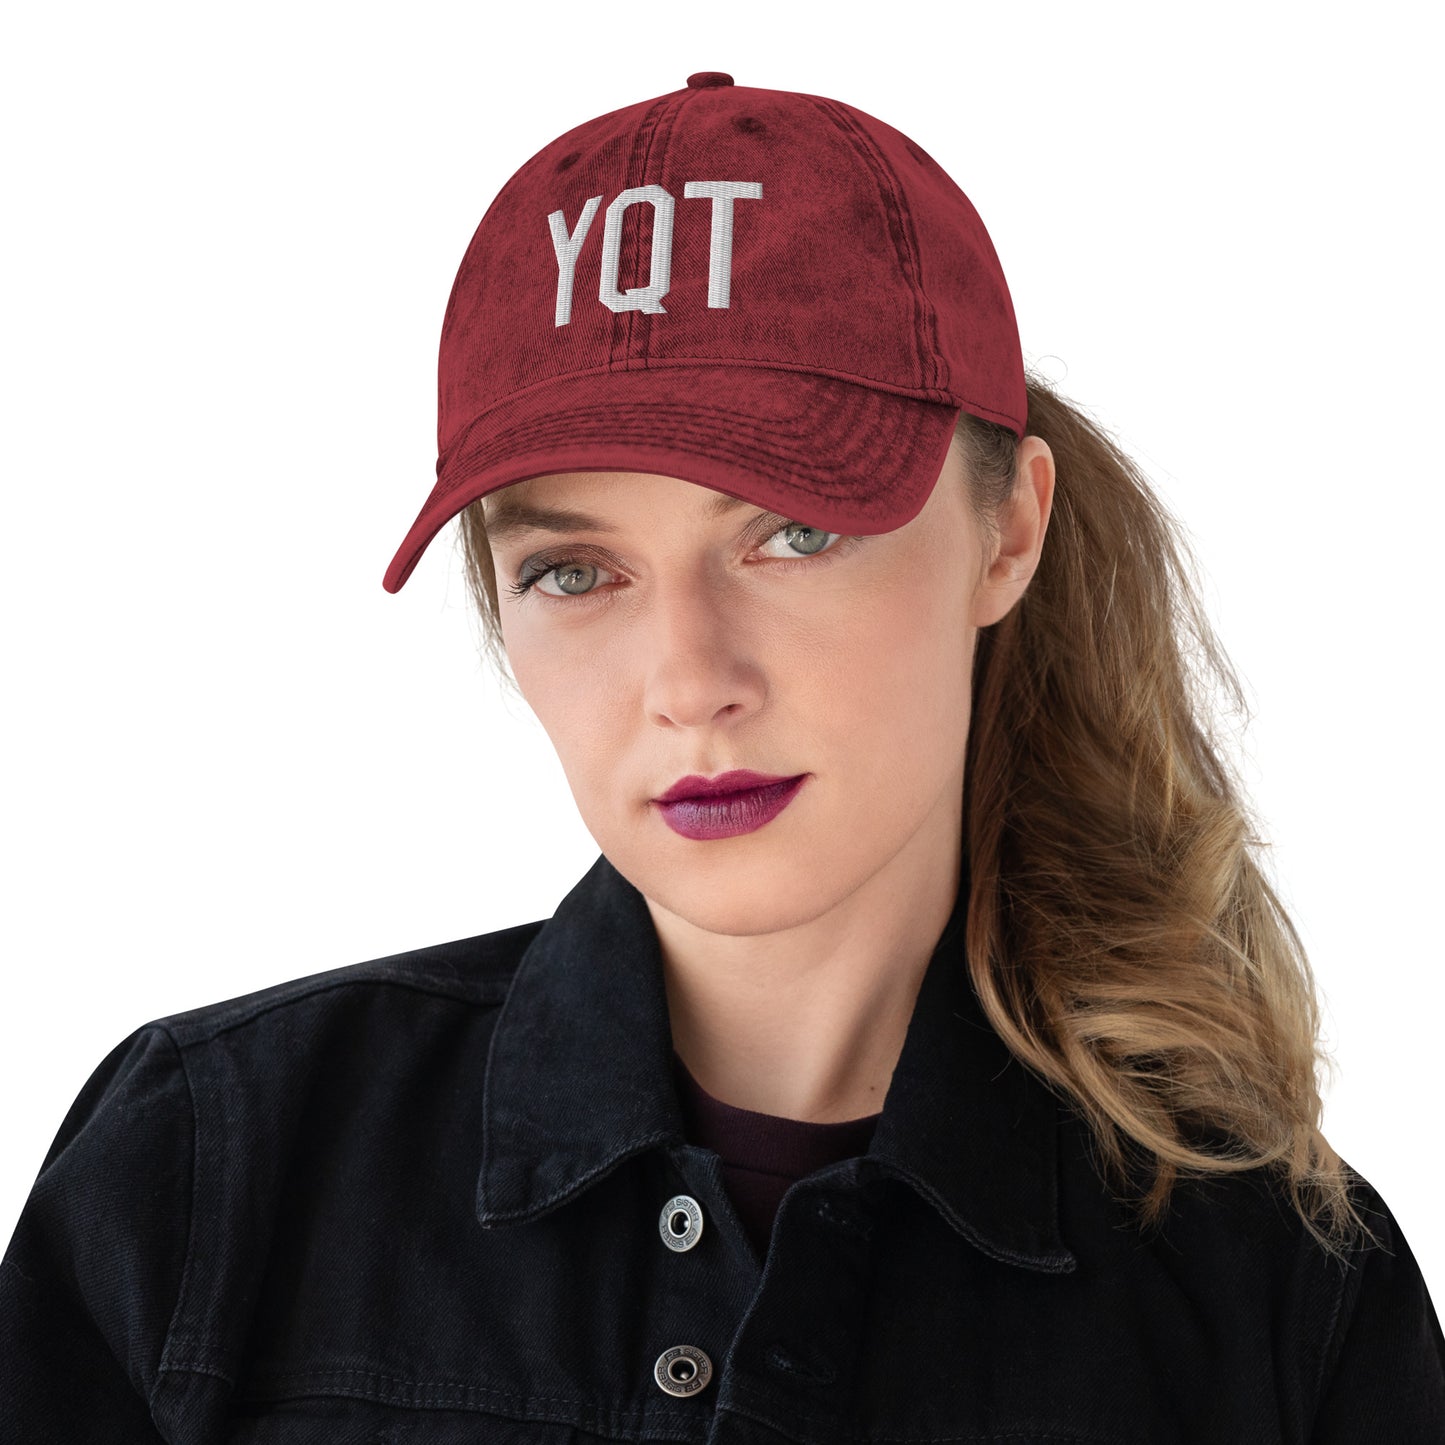 Airport Code Twill Cap - White • YQT Thunder Bay • YHM Designs - Image 05